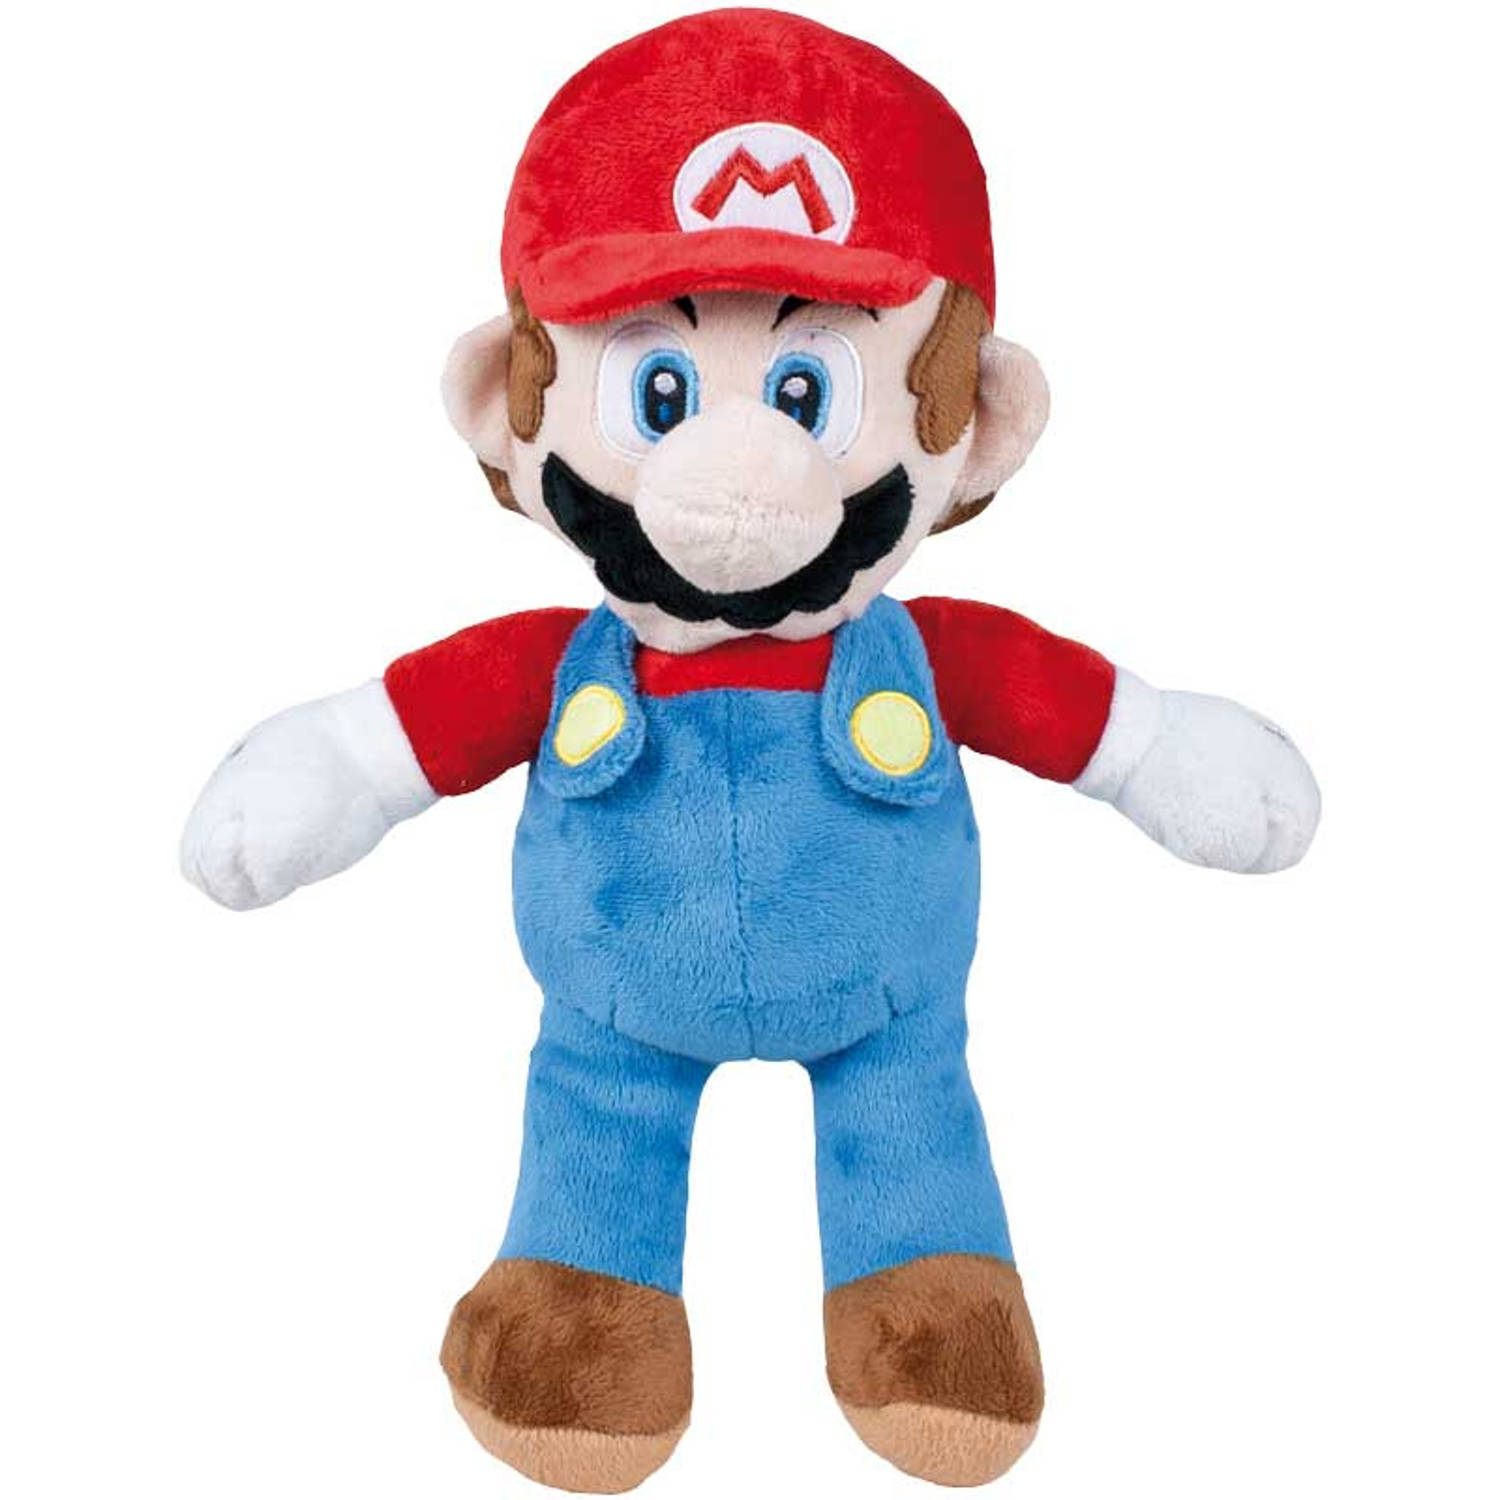 Play by Play knuffel Super Mario 30 cm polyester blauw-rood